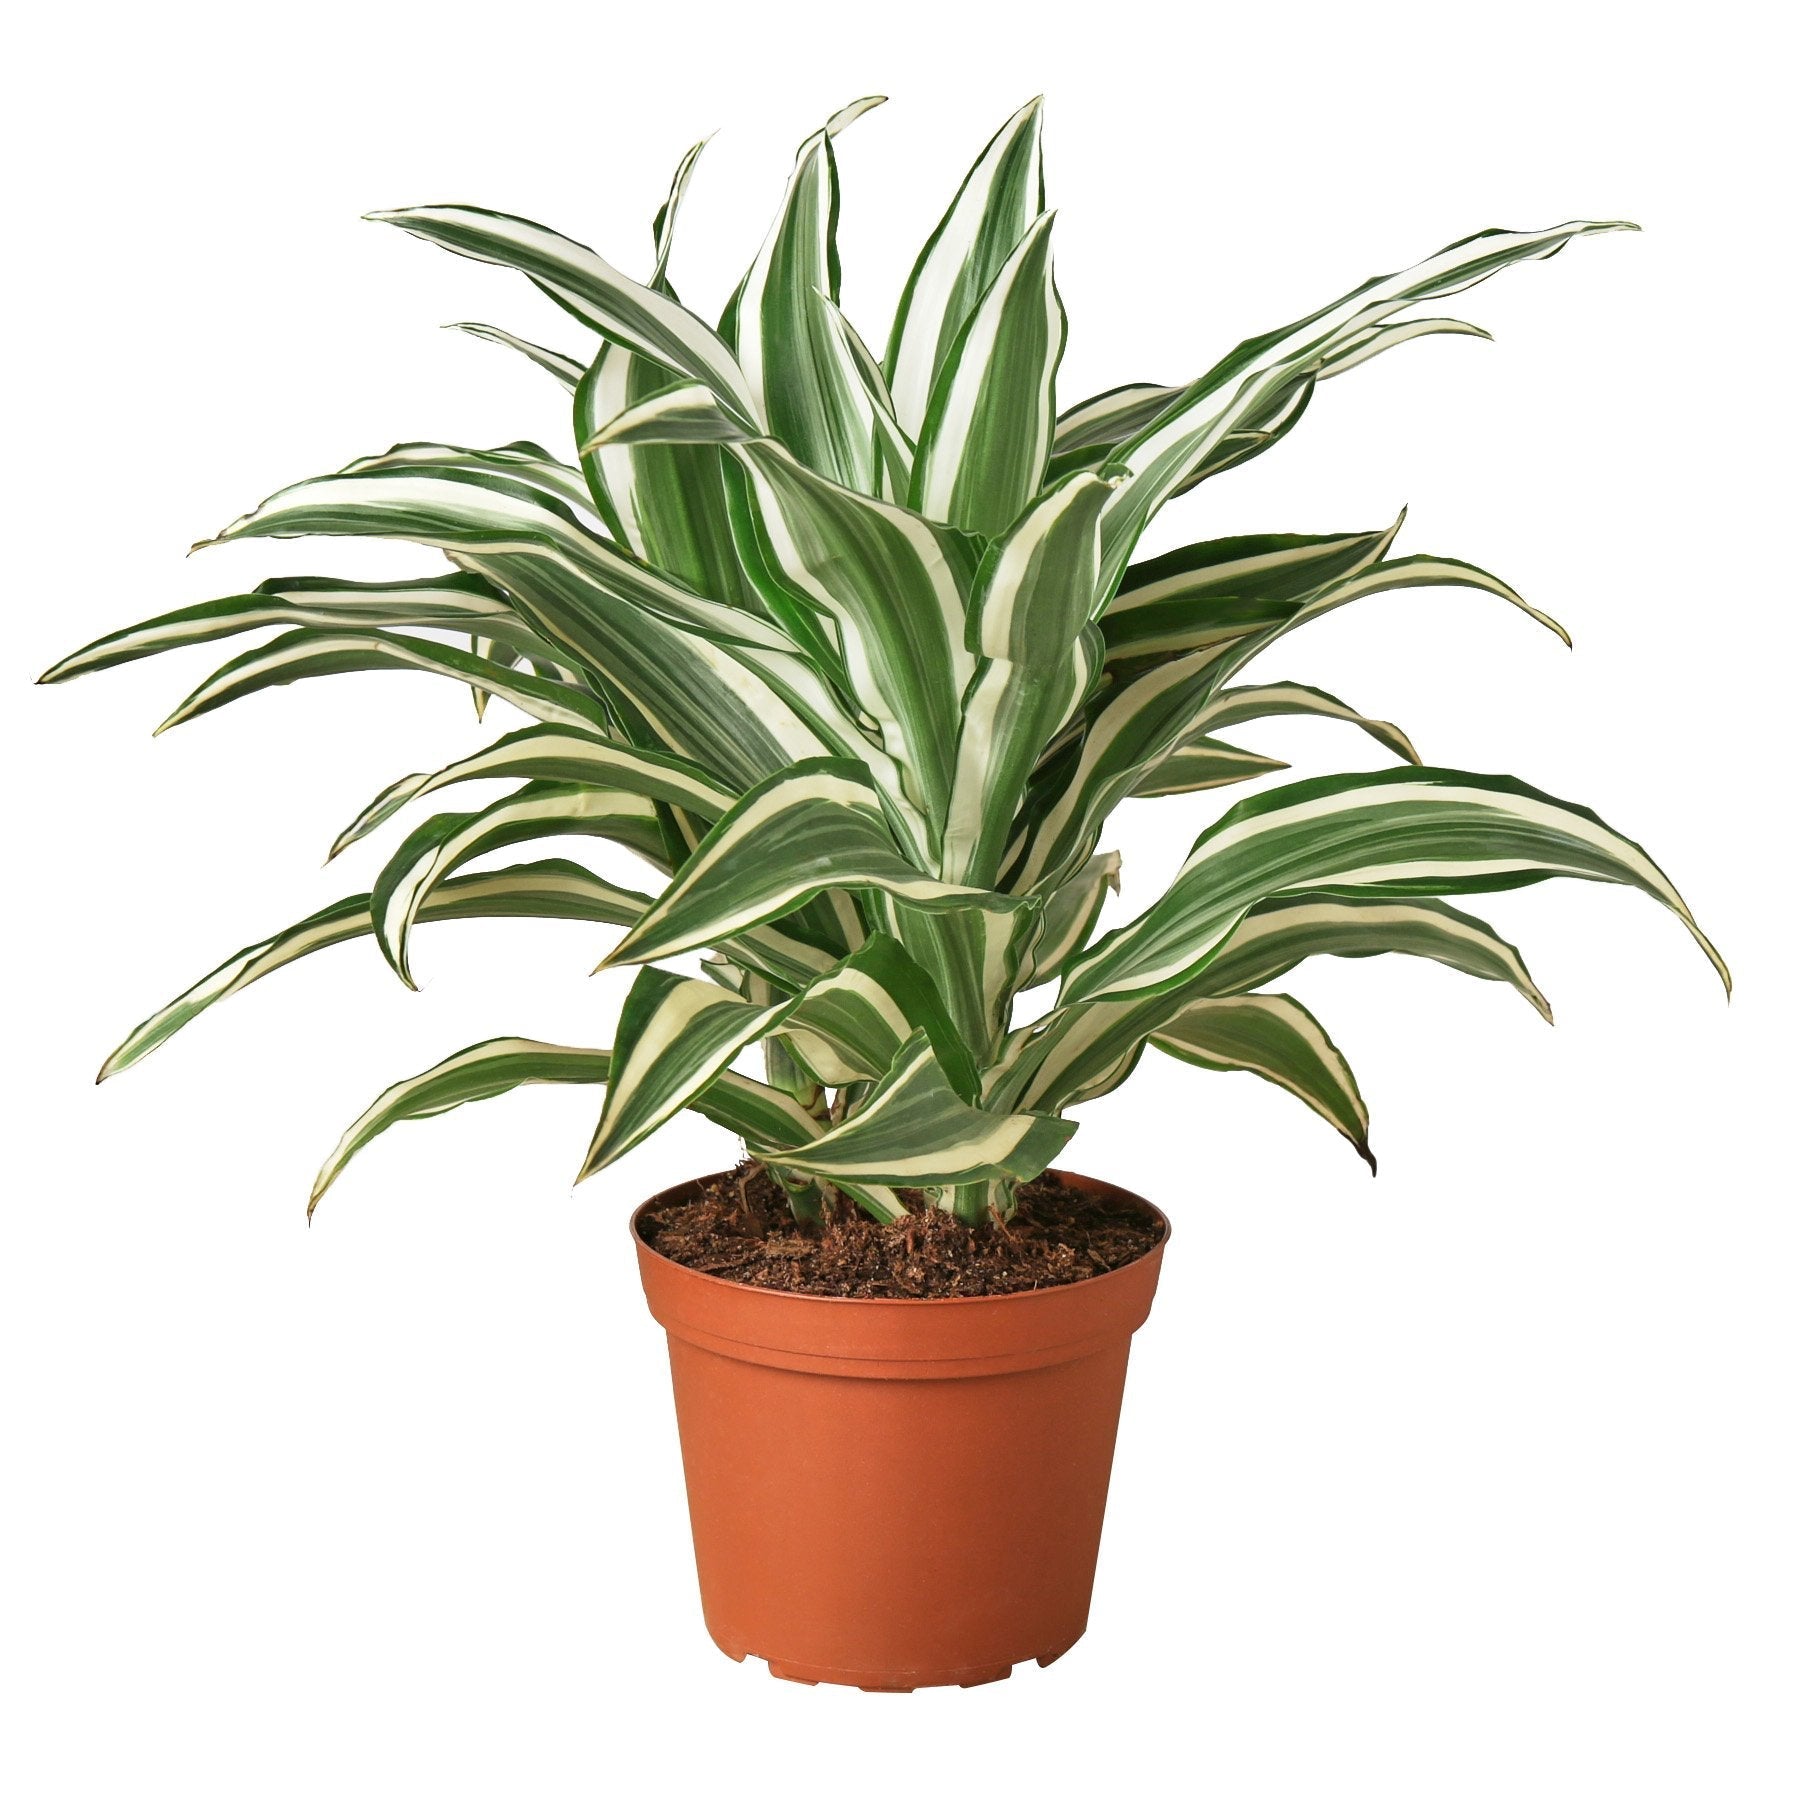 A snake plant in a pot on a white background, sourced from the best garden center near me.